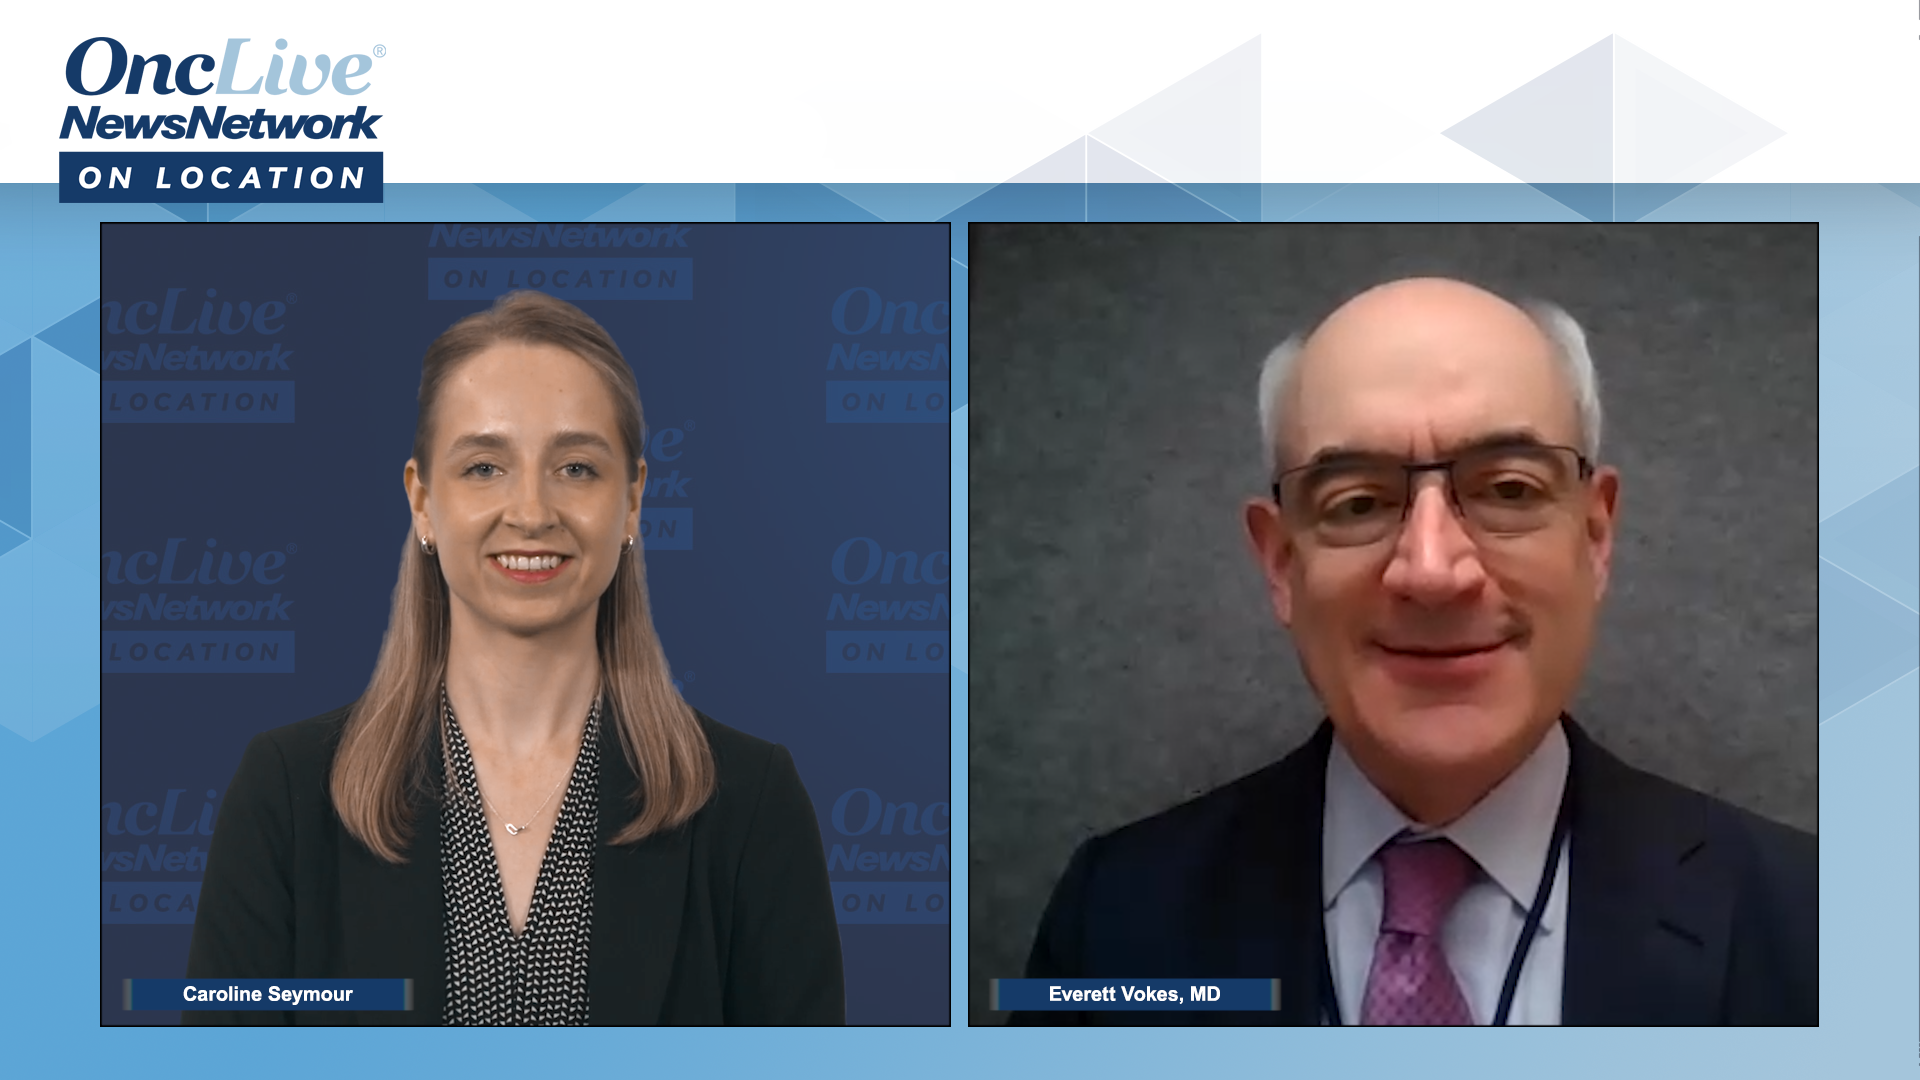 Caroline Seymour, OncLive, and Everett Vokes, MD, of the University of Chicago 